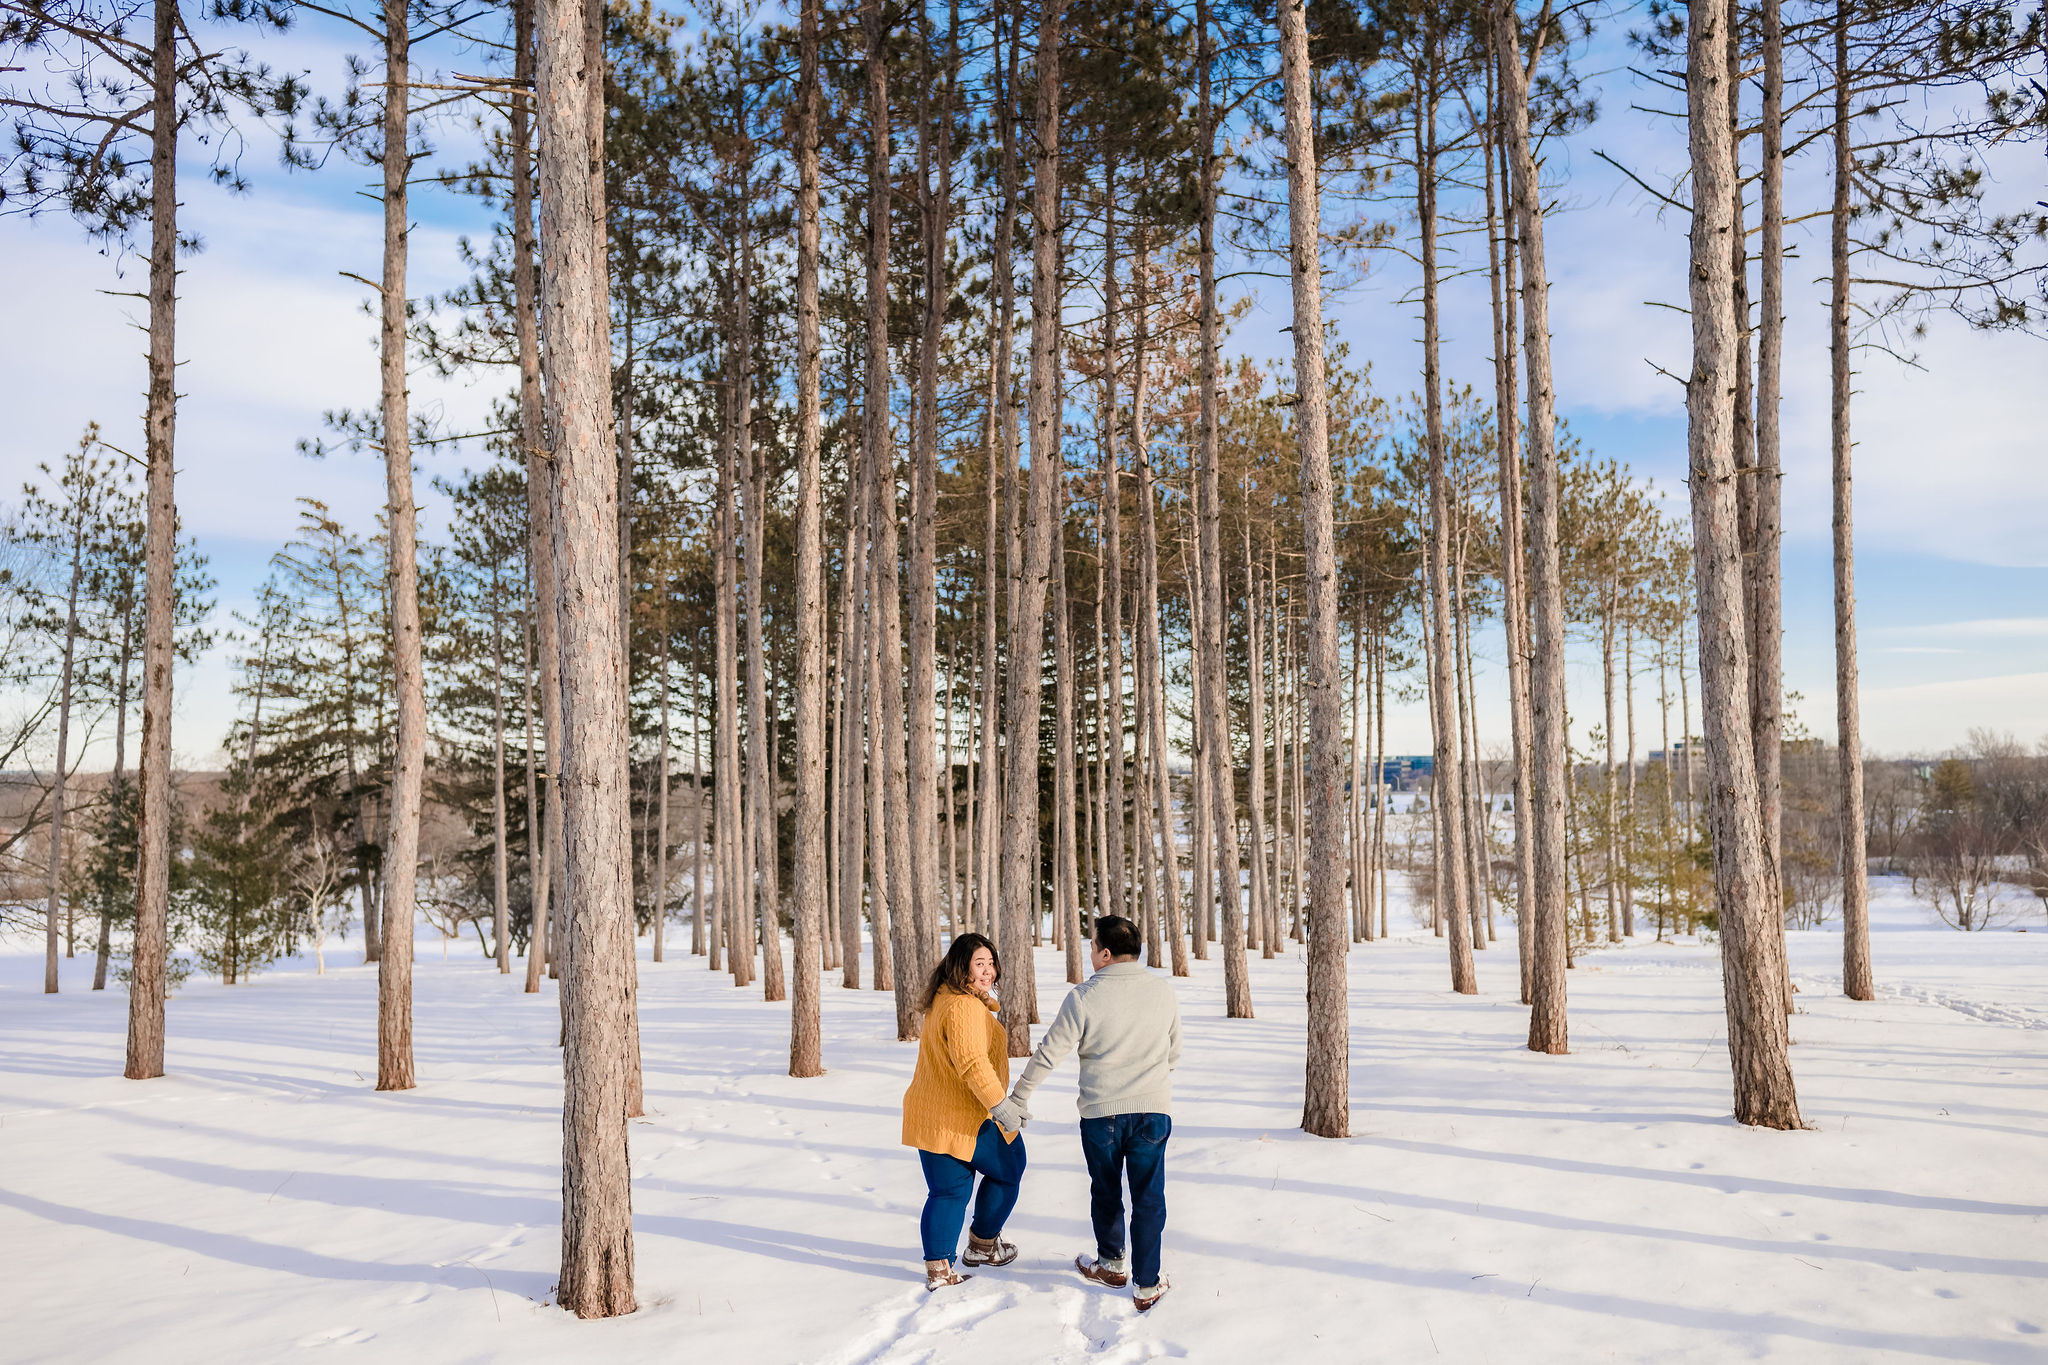 A couple walking in the snow surrounded by spruce trees.